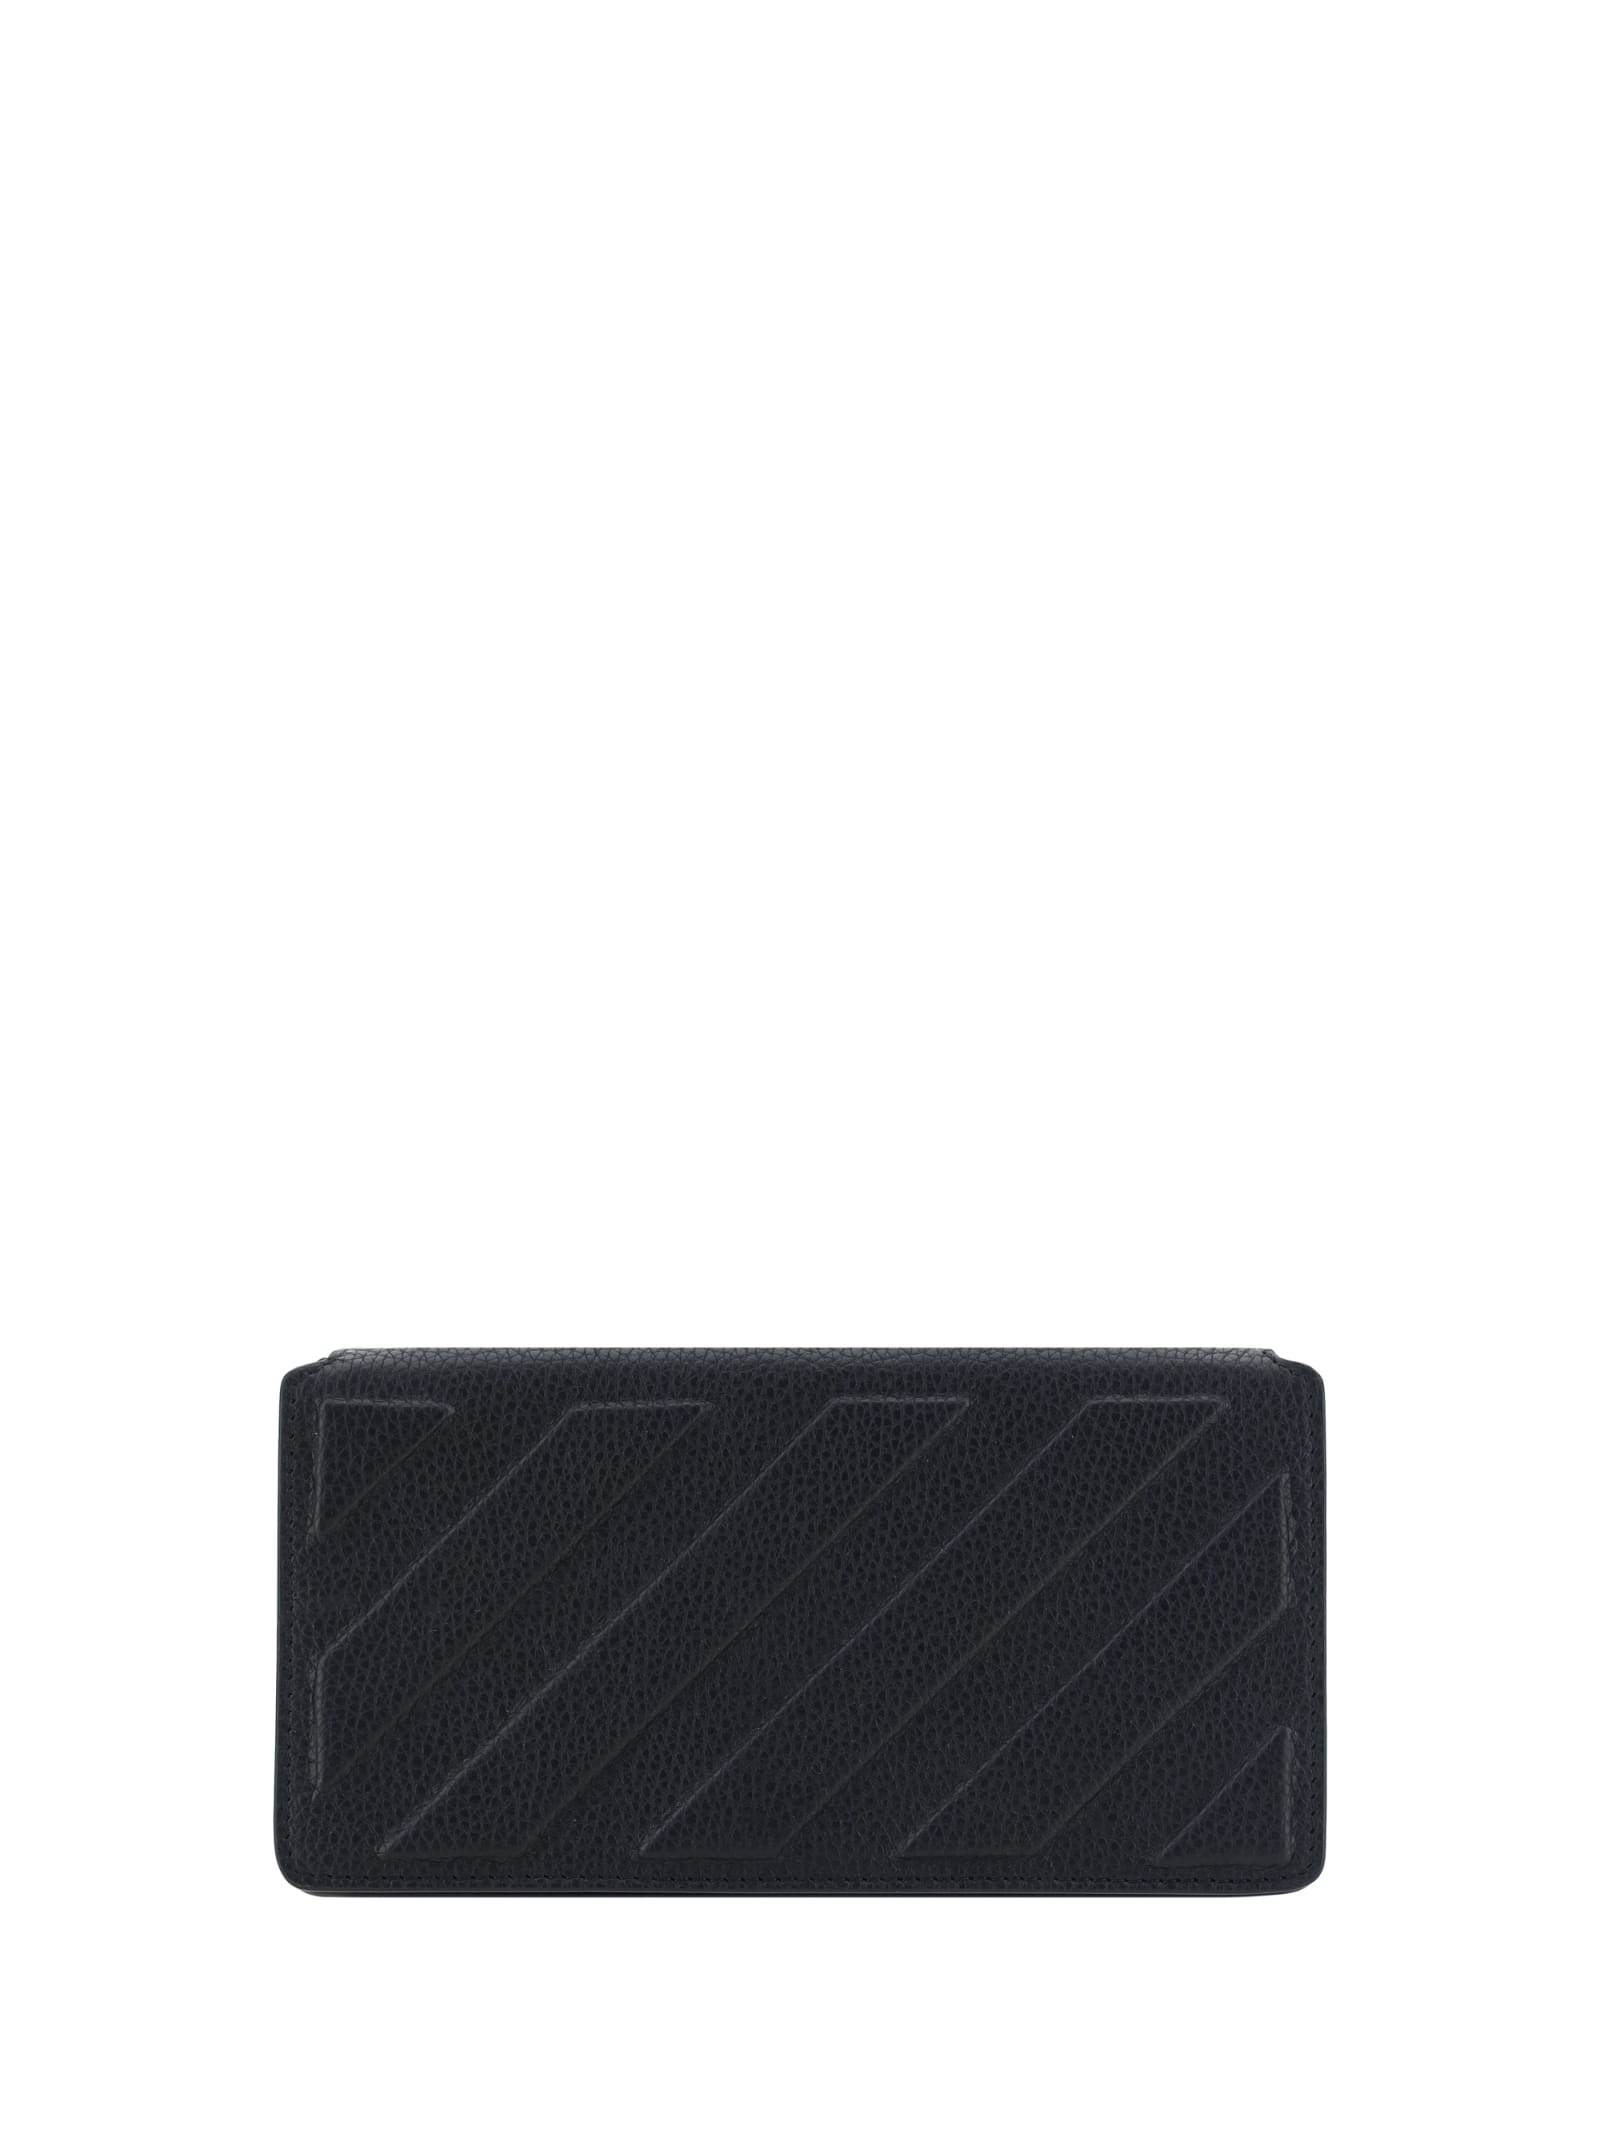 Off-White Pebbled Leather Clutch